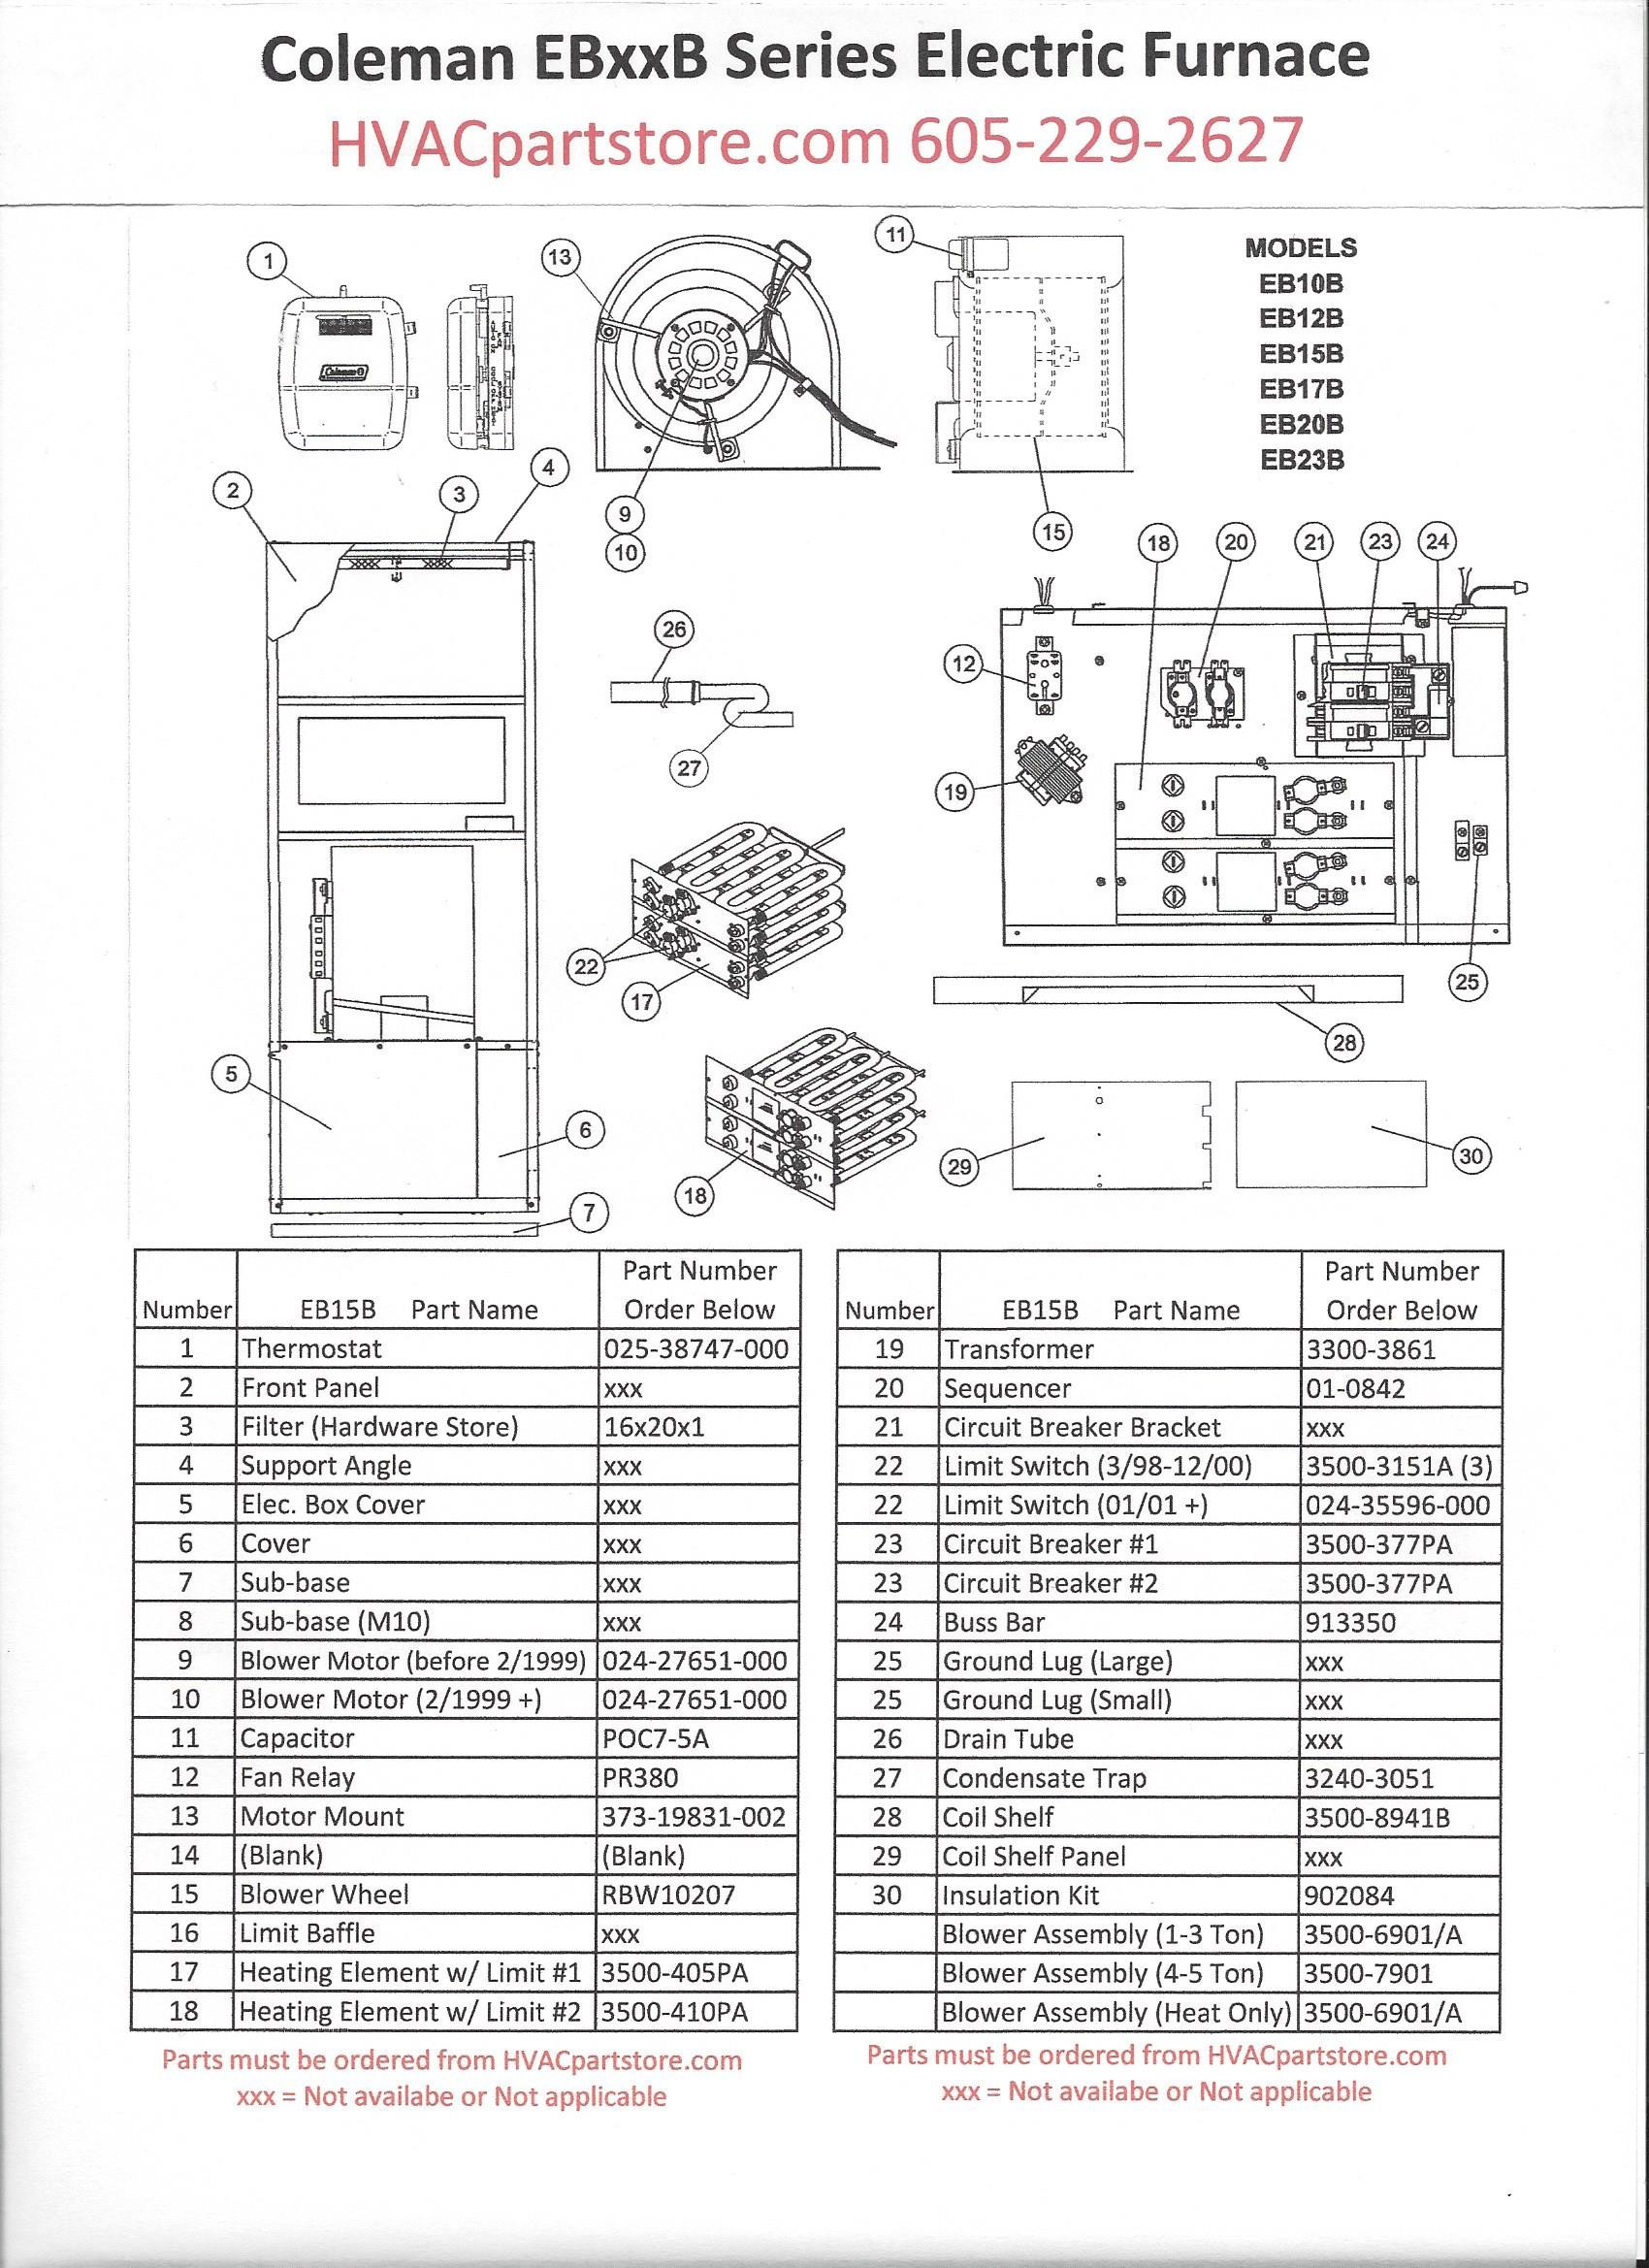 Beautiful Intertherm Electric Furnace Wiring Diagram 20 For Boss